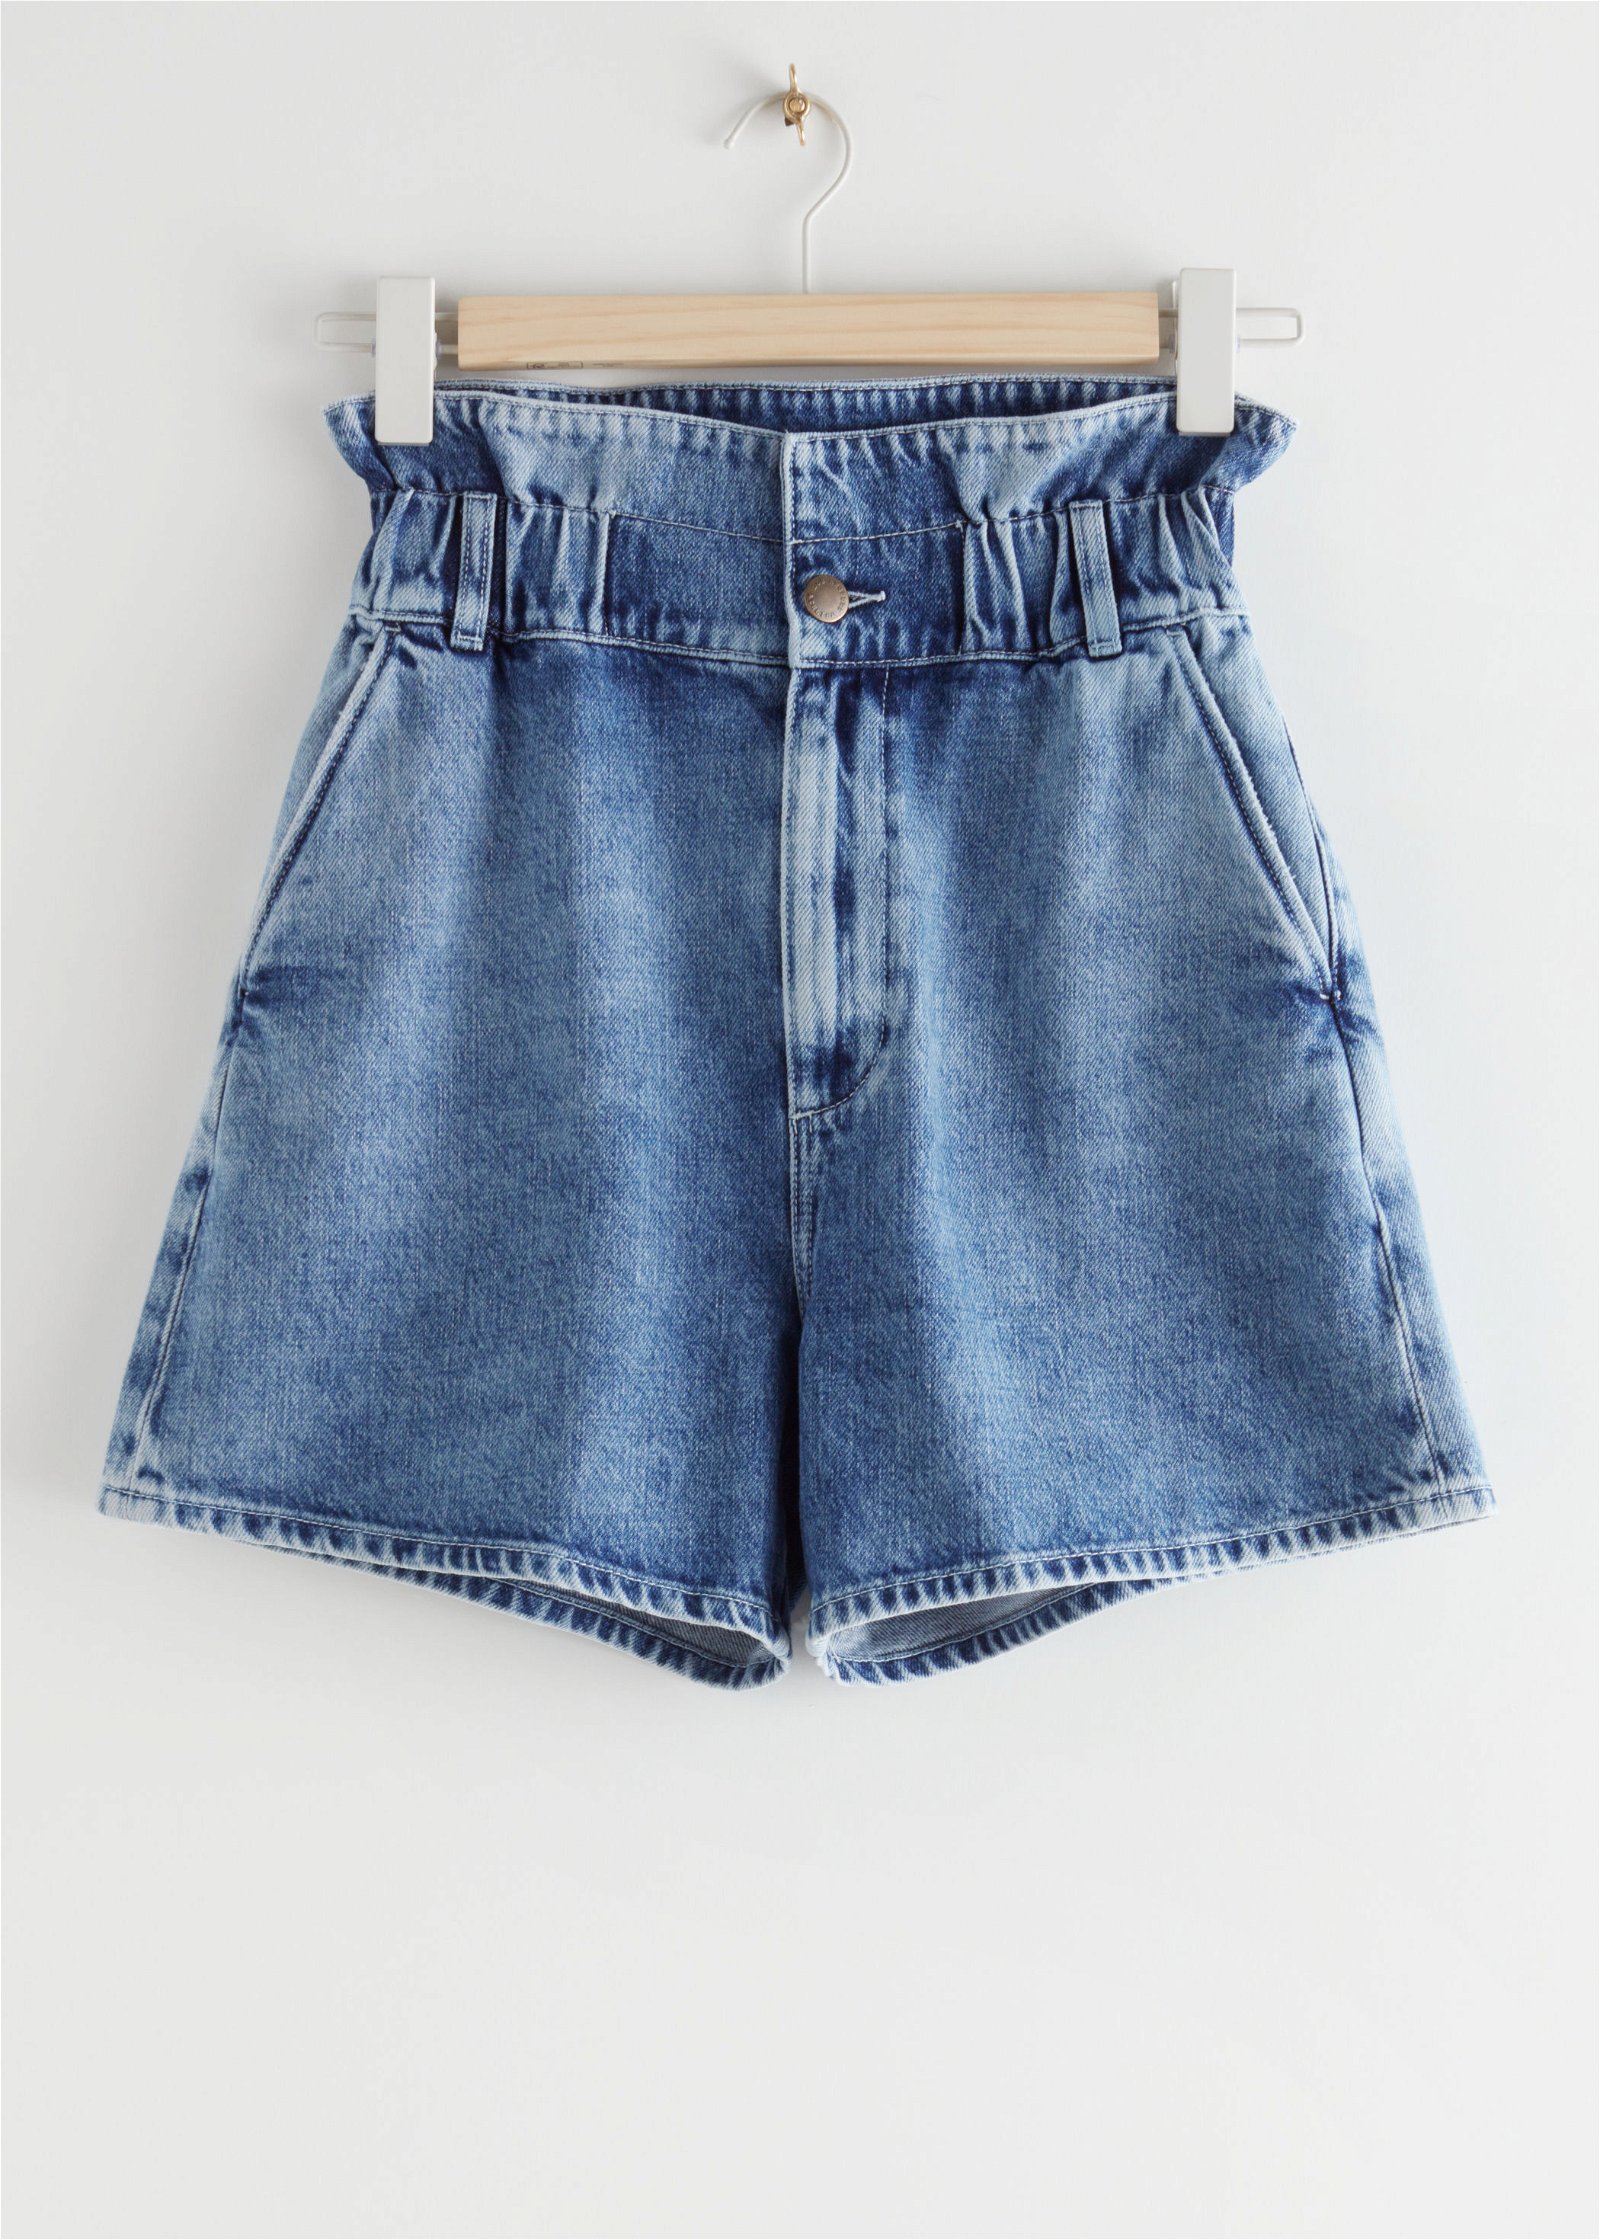 & OTHER STORIES Paperbag Waist Jeans Shorts in Mid Blue | Endource